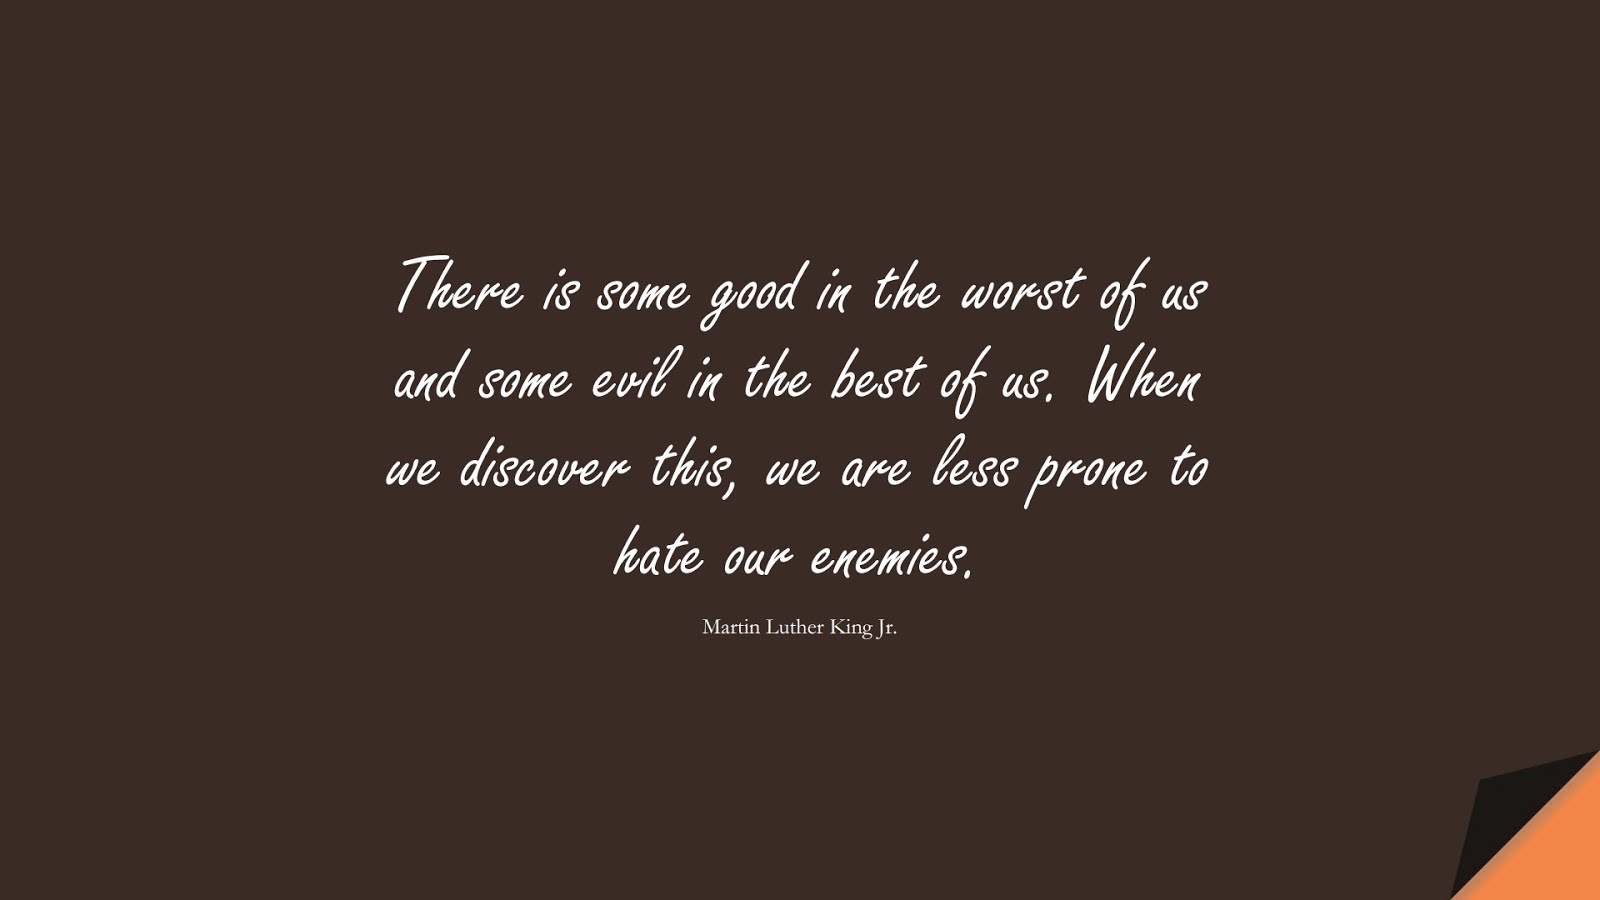 There is some good in the worst of us and some evil in the best of us. When we discover this, we are less prone to hate our enemies. (Martin Luther King Jr.);  #MartinLutherKingJrQuotes